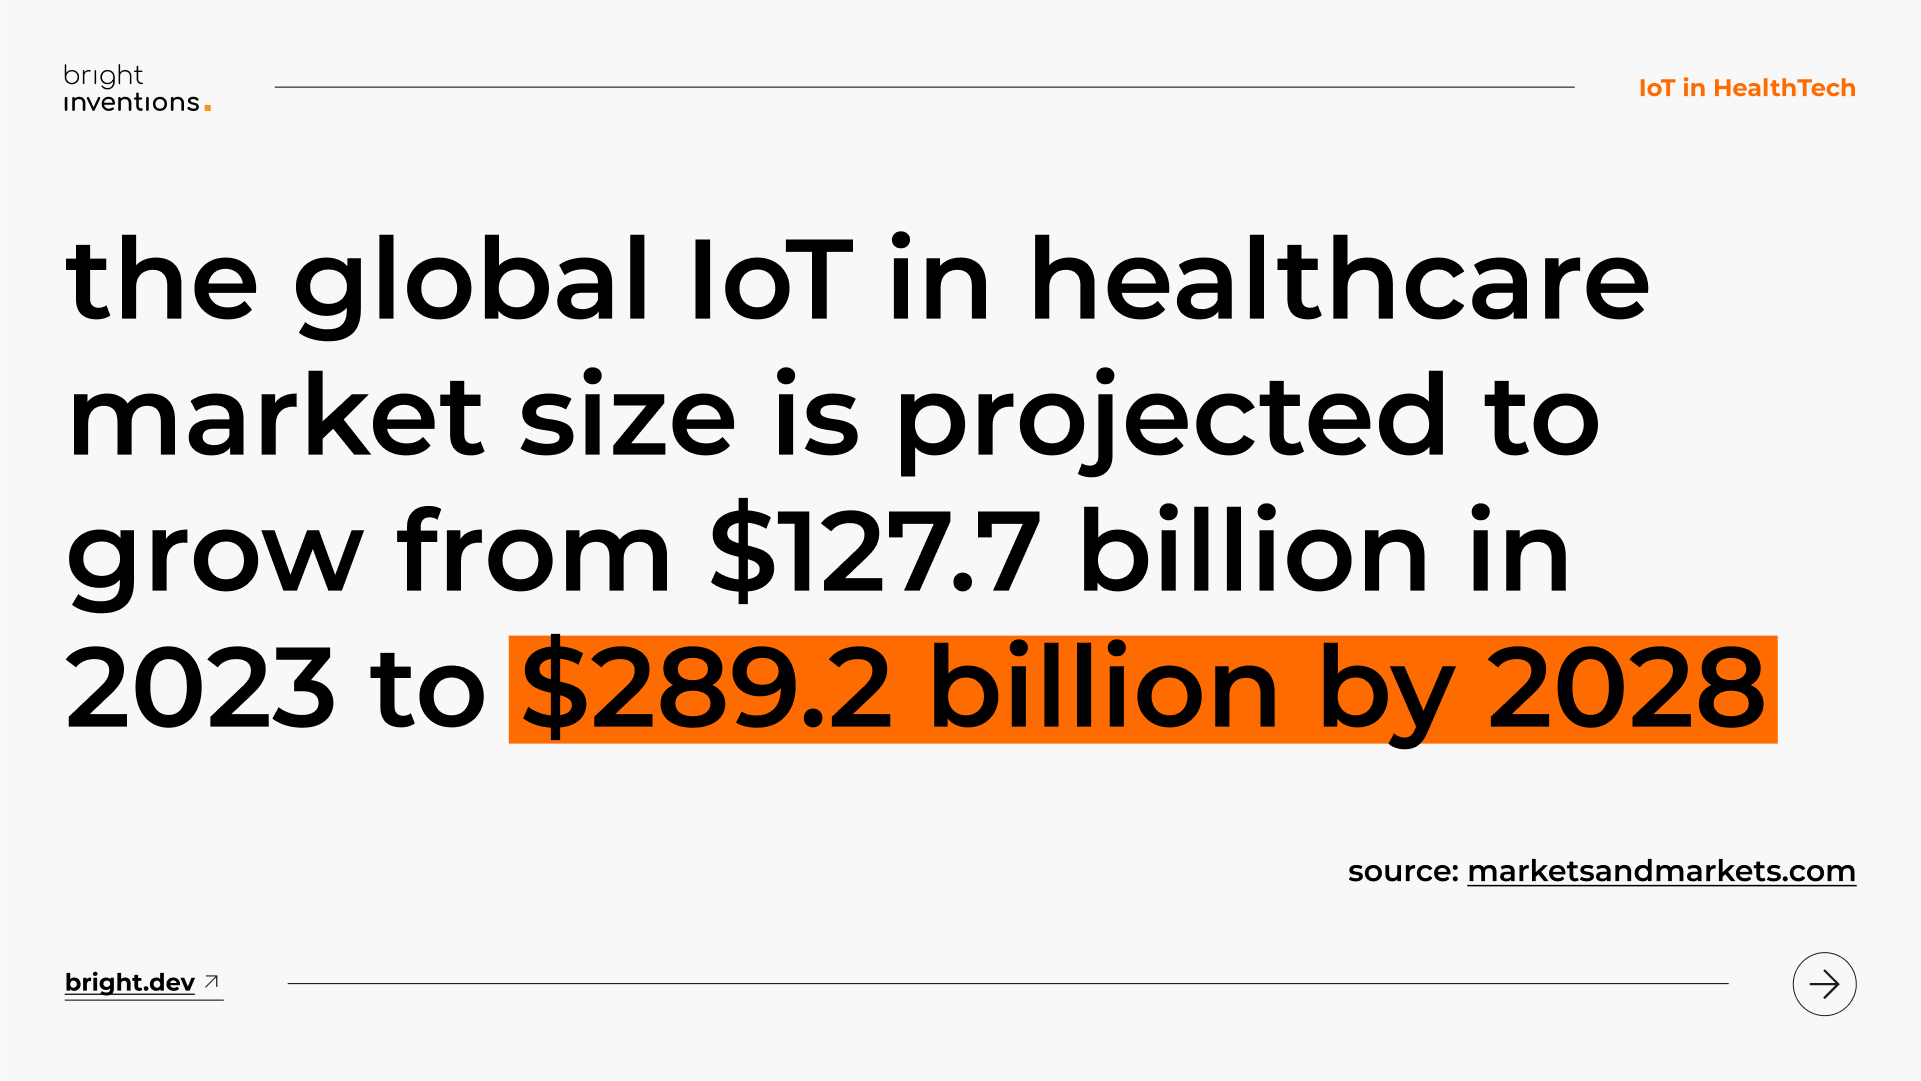 IoT in the healthcare market overview